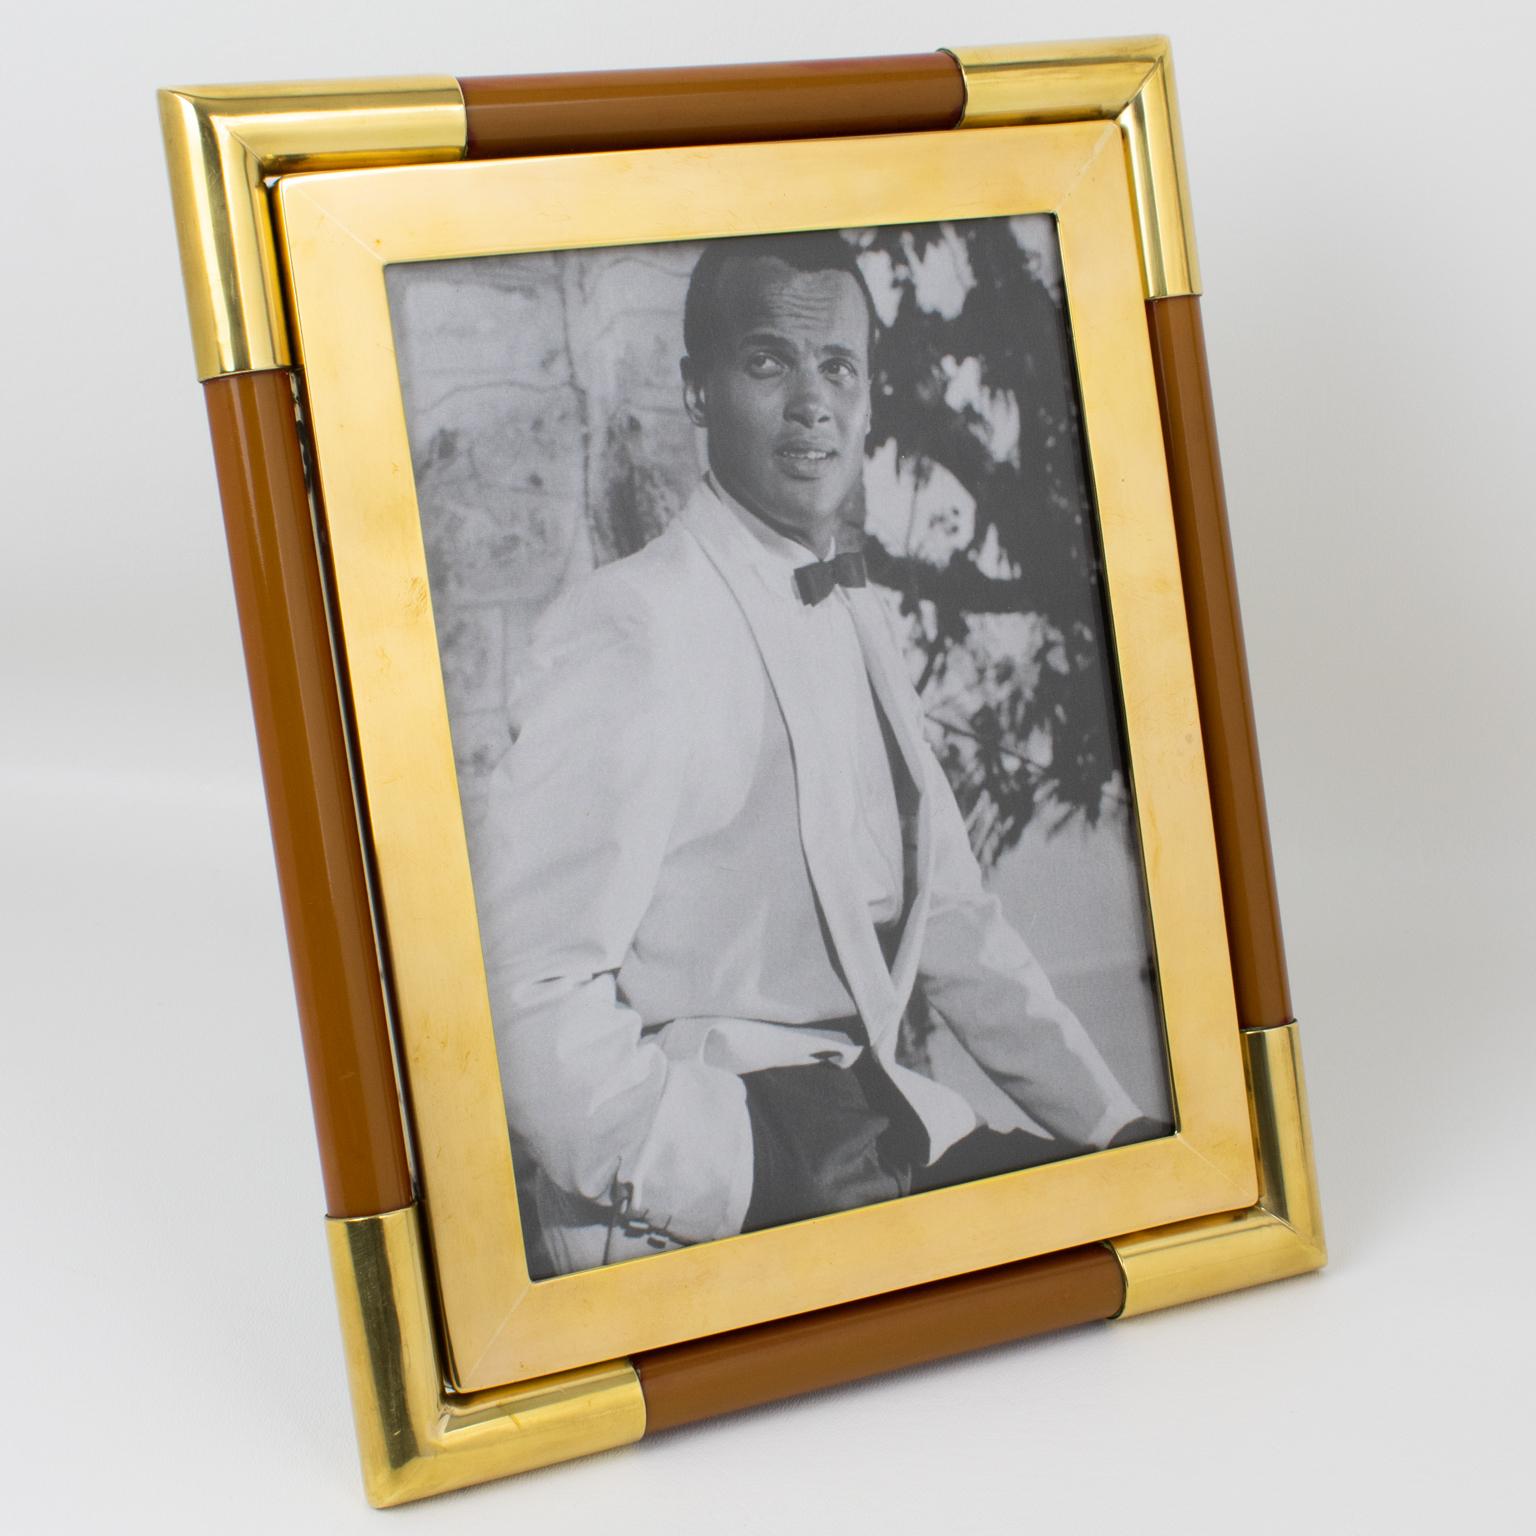 Silversmith Christofle, Paris, crafted this luxury brass and resin picture frame for its Christofle Collection in the 1970s. The elegant and sophisticated design boasts solid polished brass framing complimented with toffee brown resin tube elements.